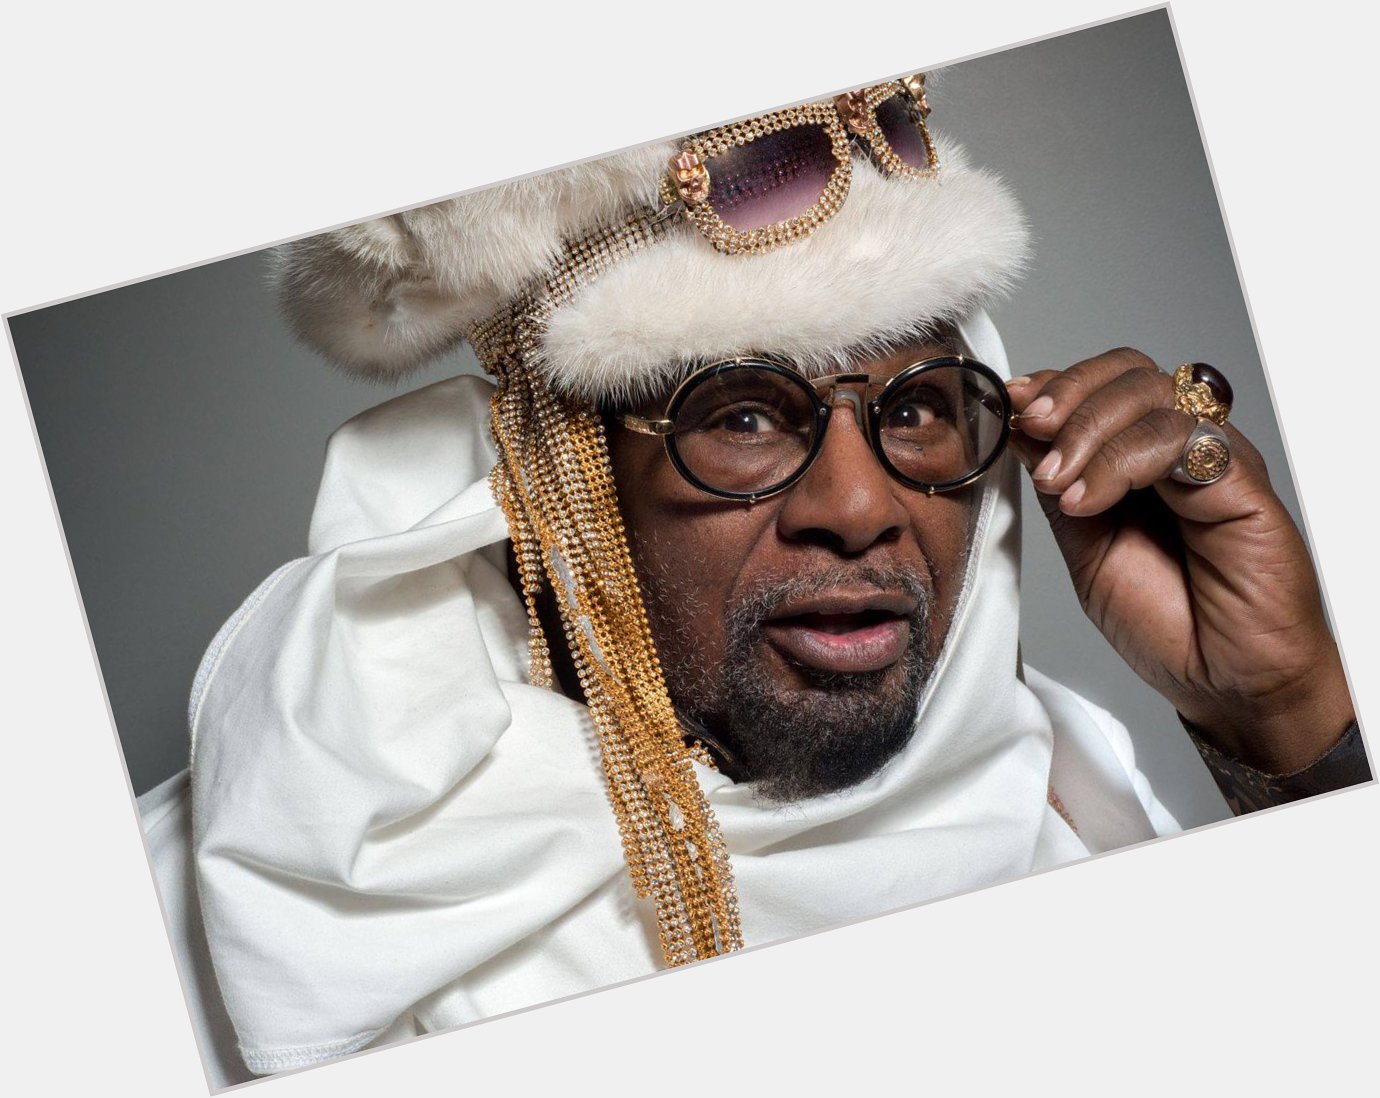 Happy Birthday to George Clinton who turns 78 today! 